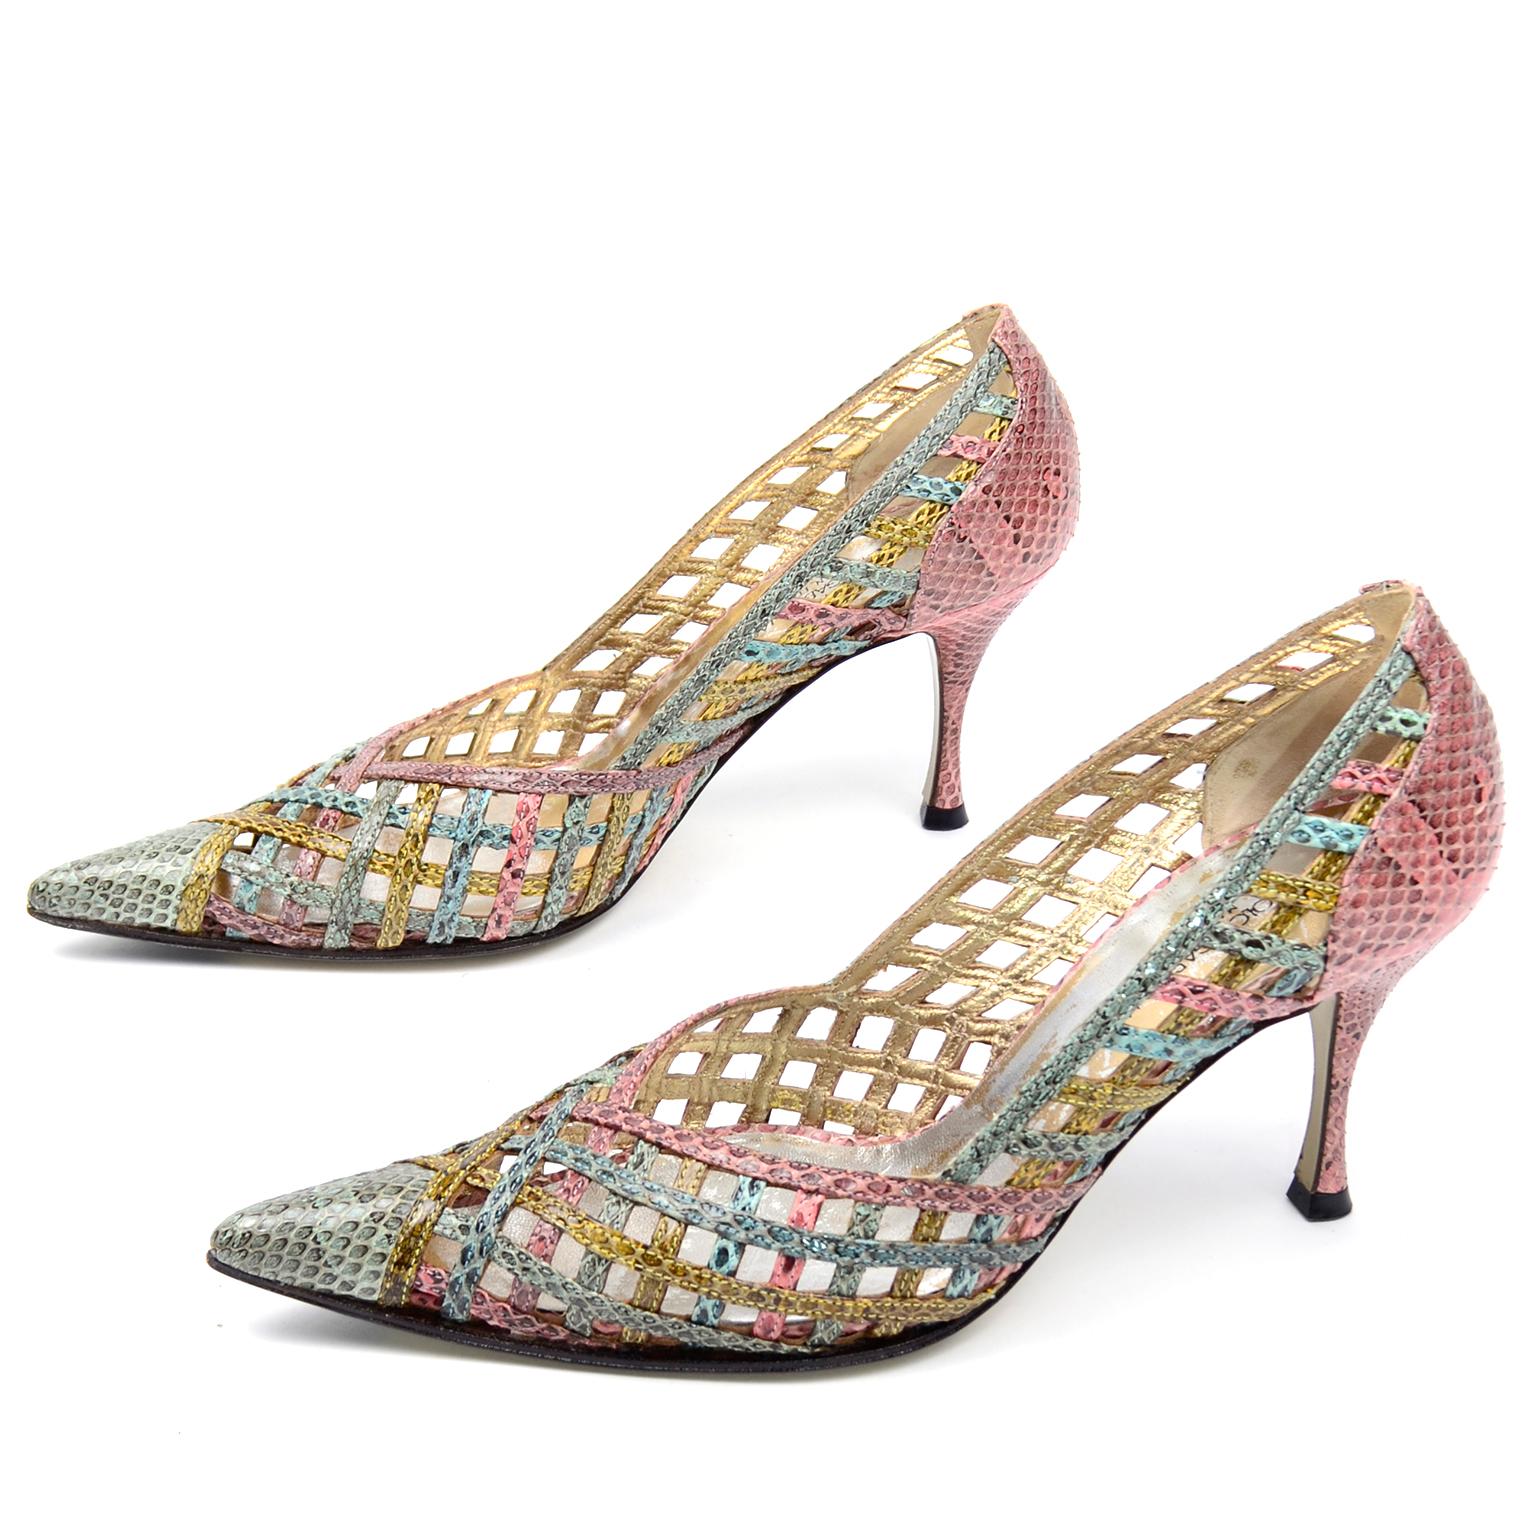 Dolce & Gabbana Heels Vintage Multi Color Woven Snakeskin Pointed Toe Shoes In Excellent Condition For Sale In Portland, OR